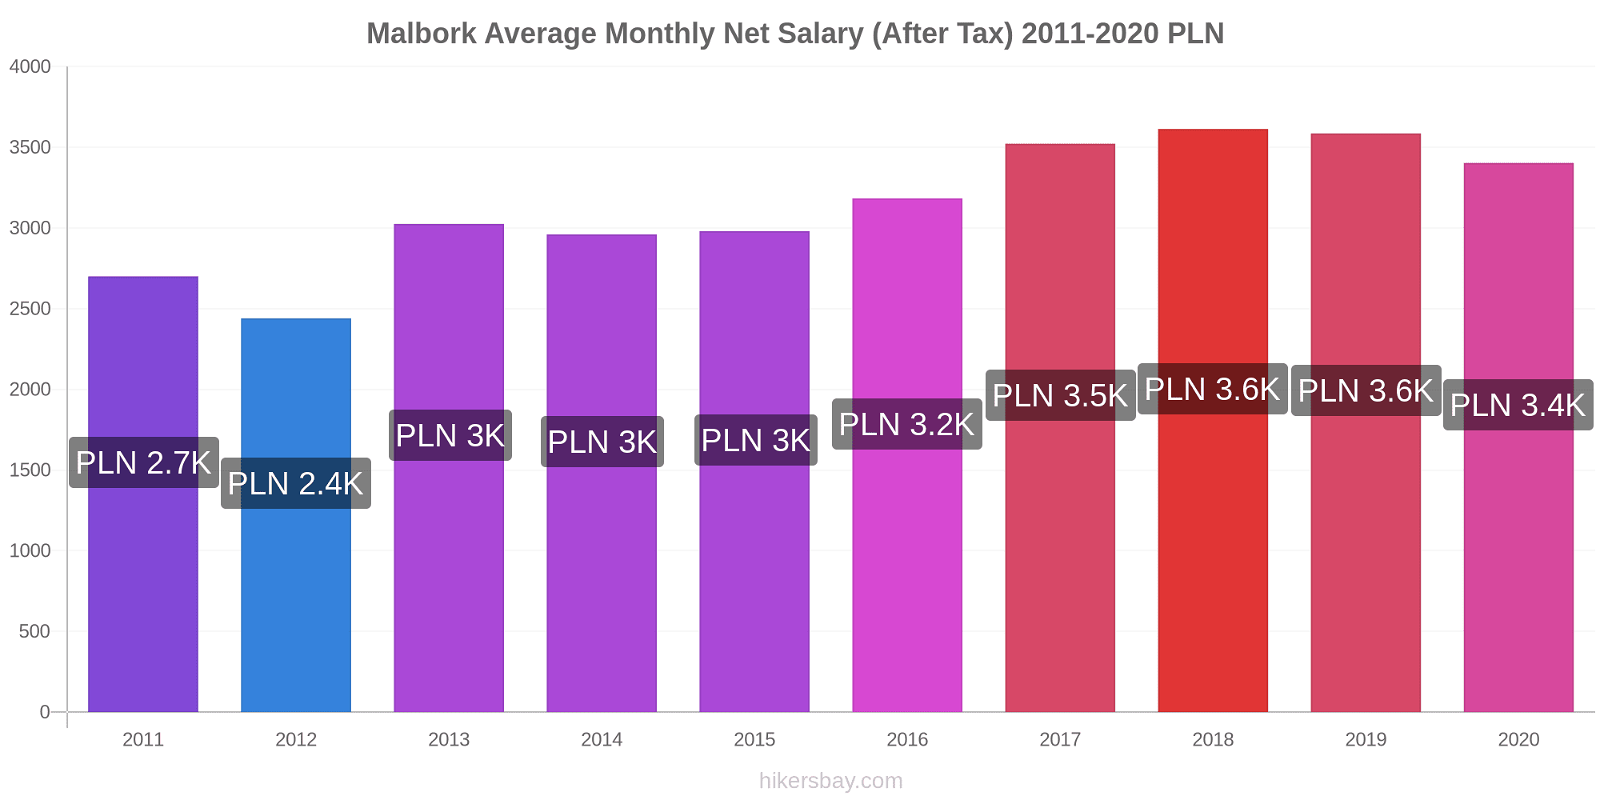 Malbork price changes Average Monthly Net Salary (After Tax) hikersbay.com